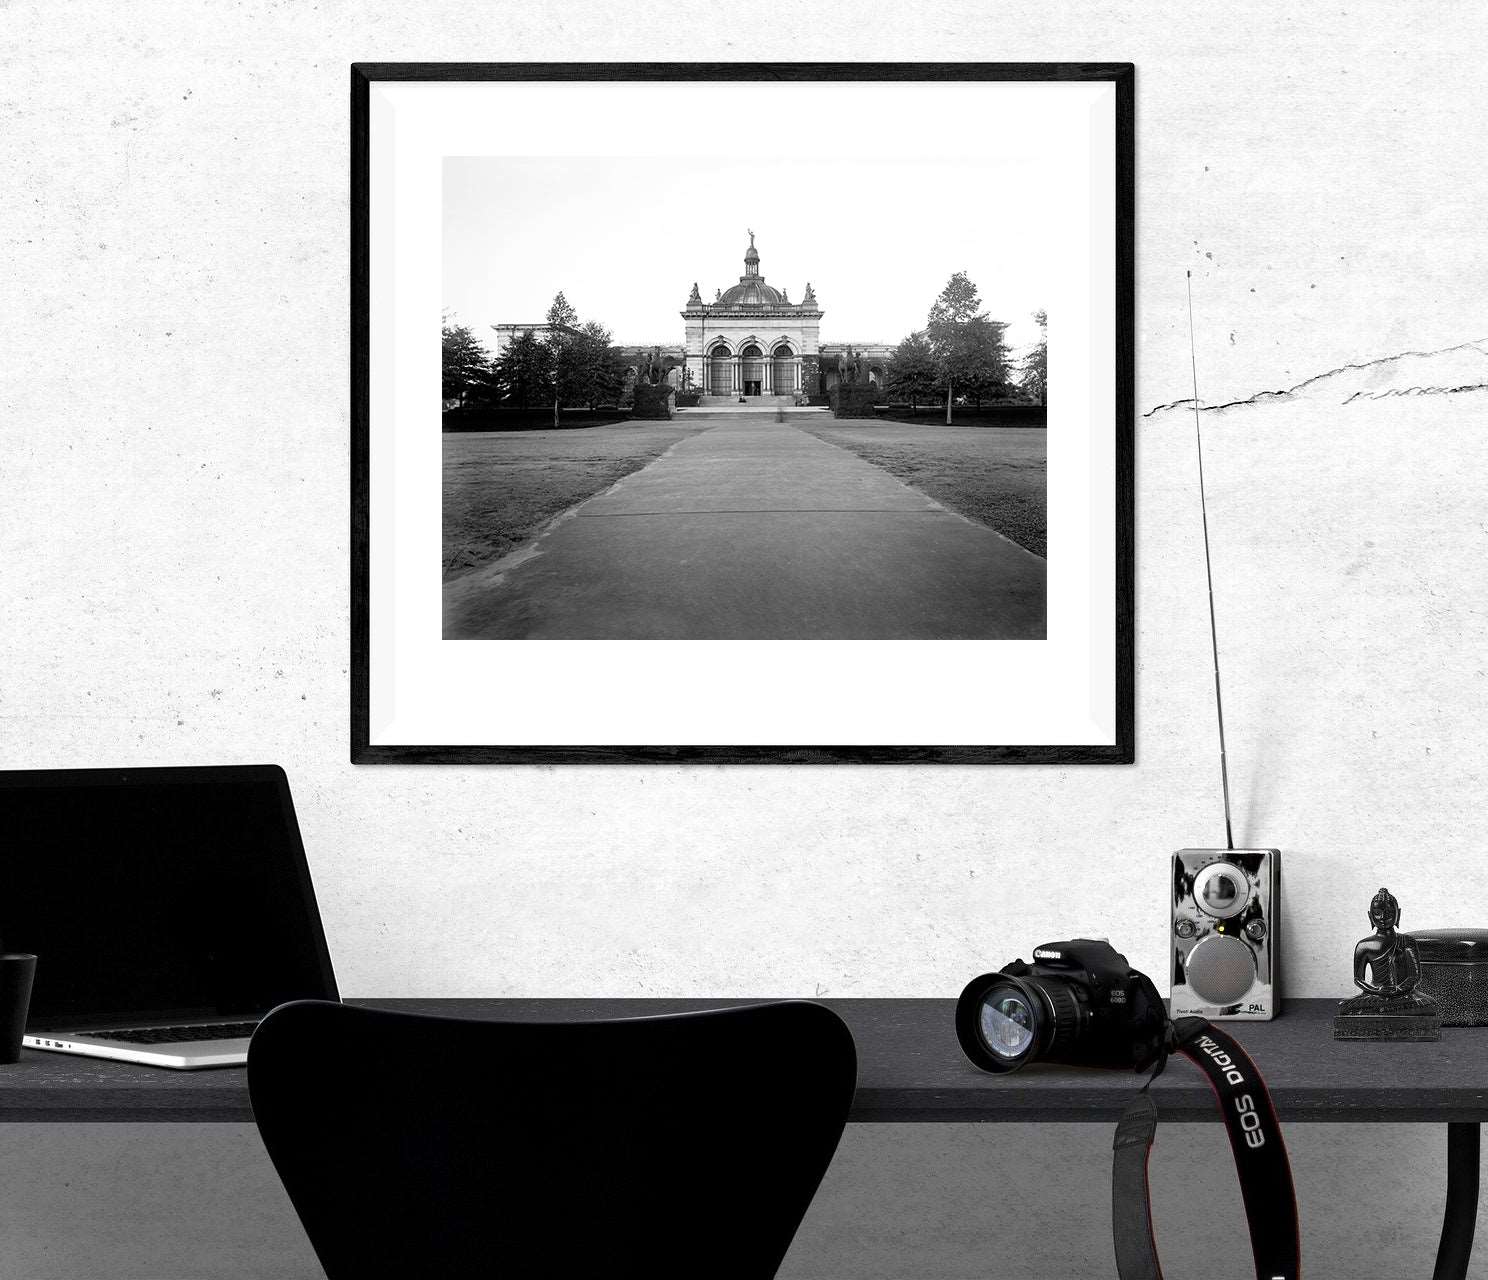 A framed paper print featuring a photograph of Fairmount Park in Philadelphia, hanging in an office